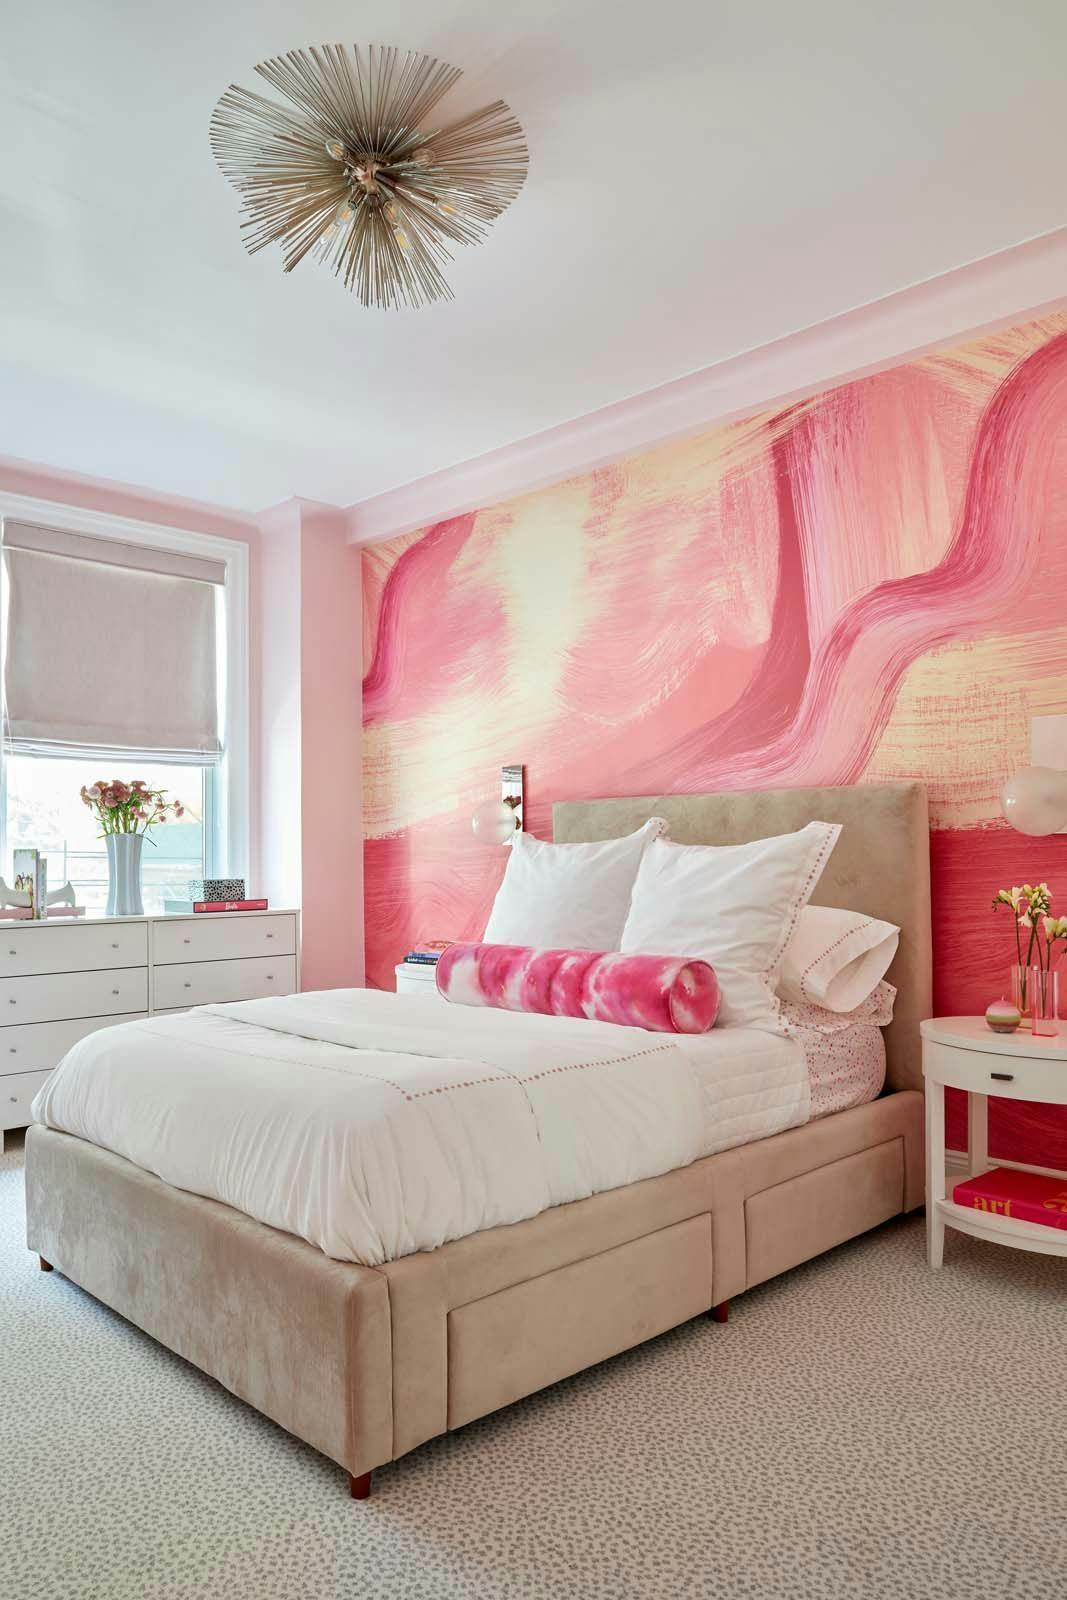 West End bedroom with pink accents